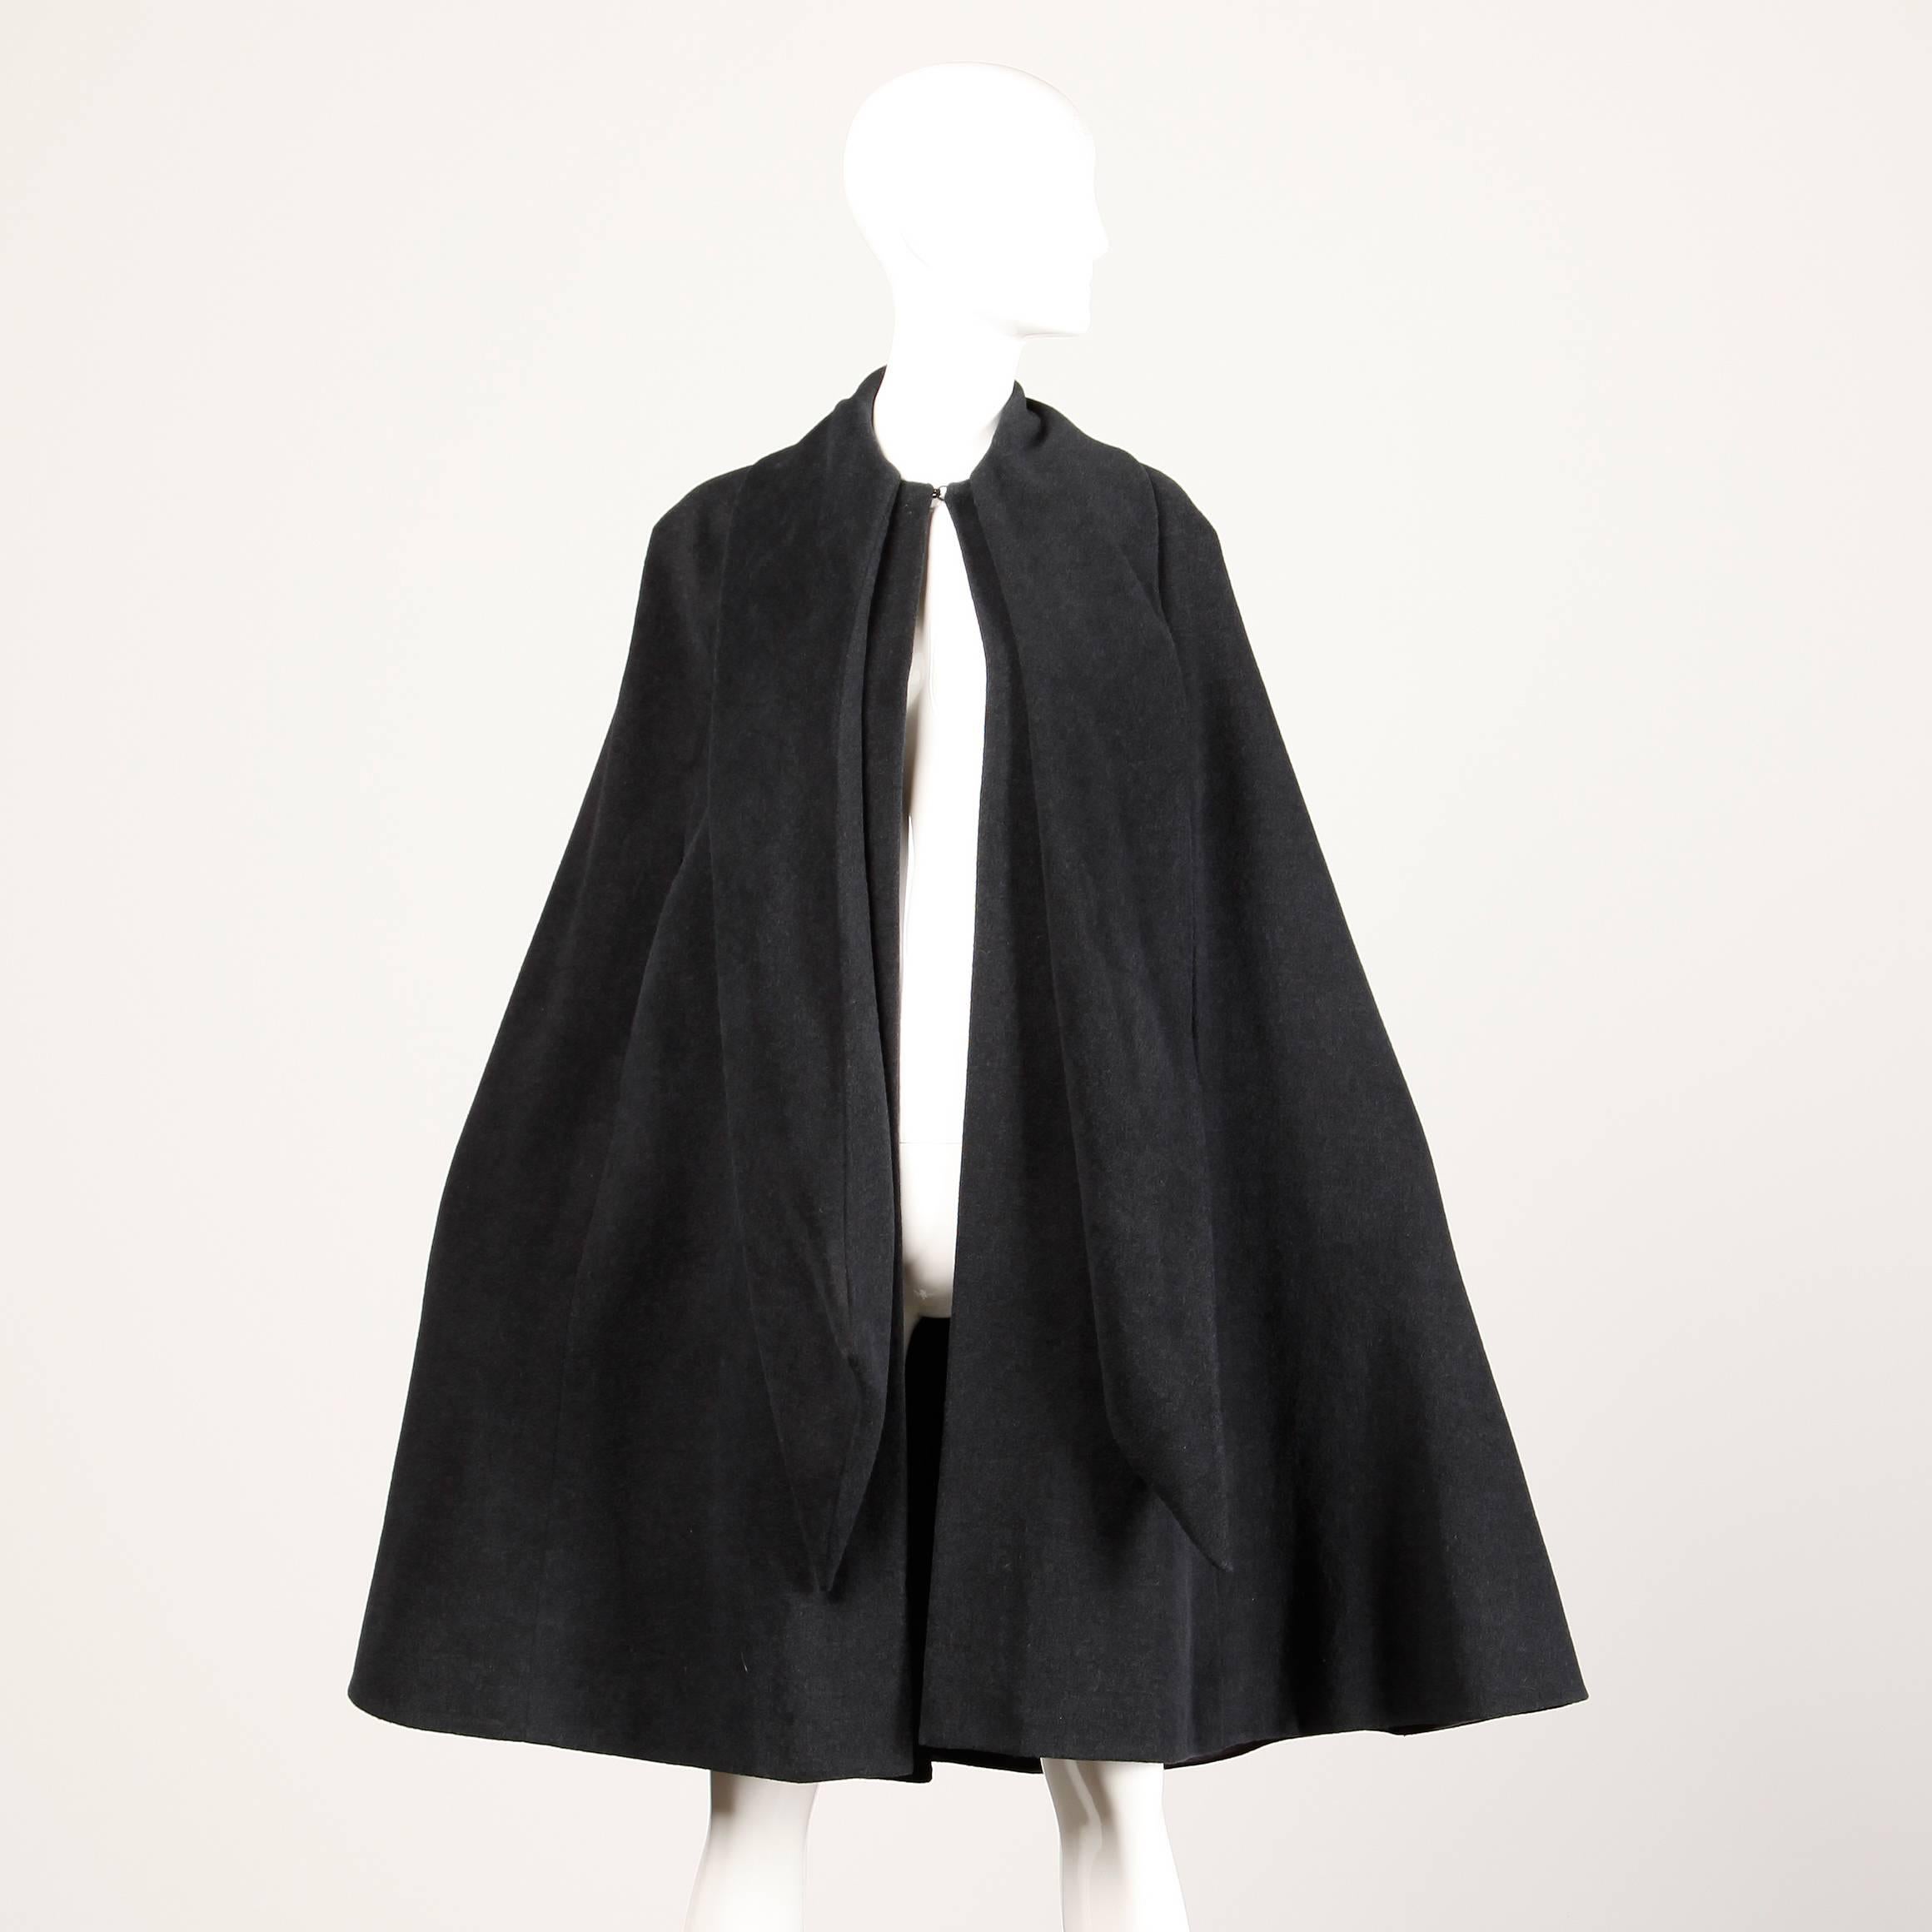 Women's Mollie Parnis Vintage 1960s Charcoal Gray Wool Cape Coat with Attached Scarf